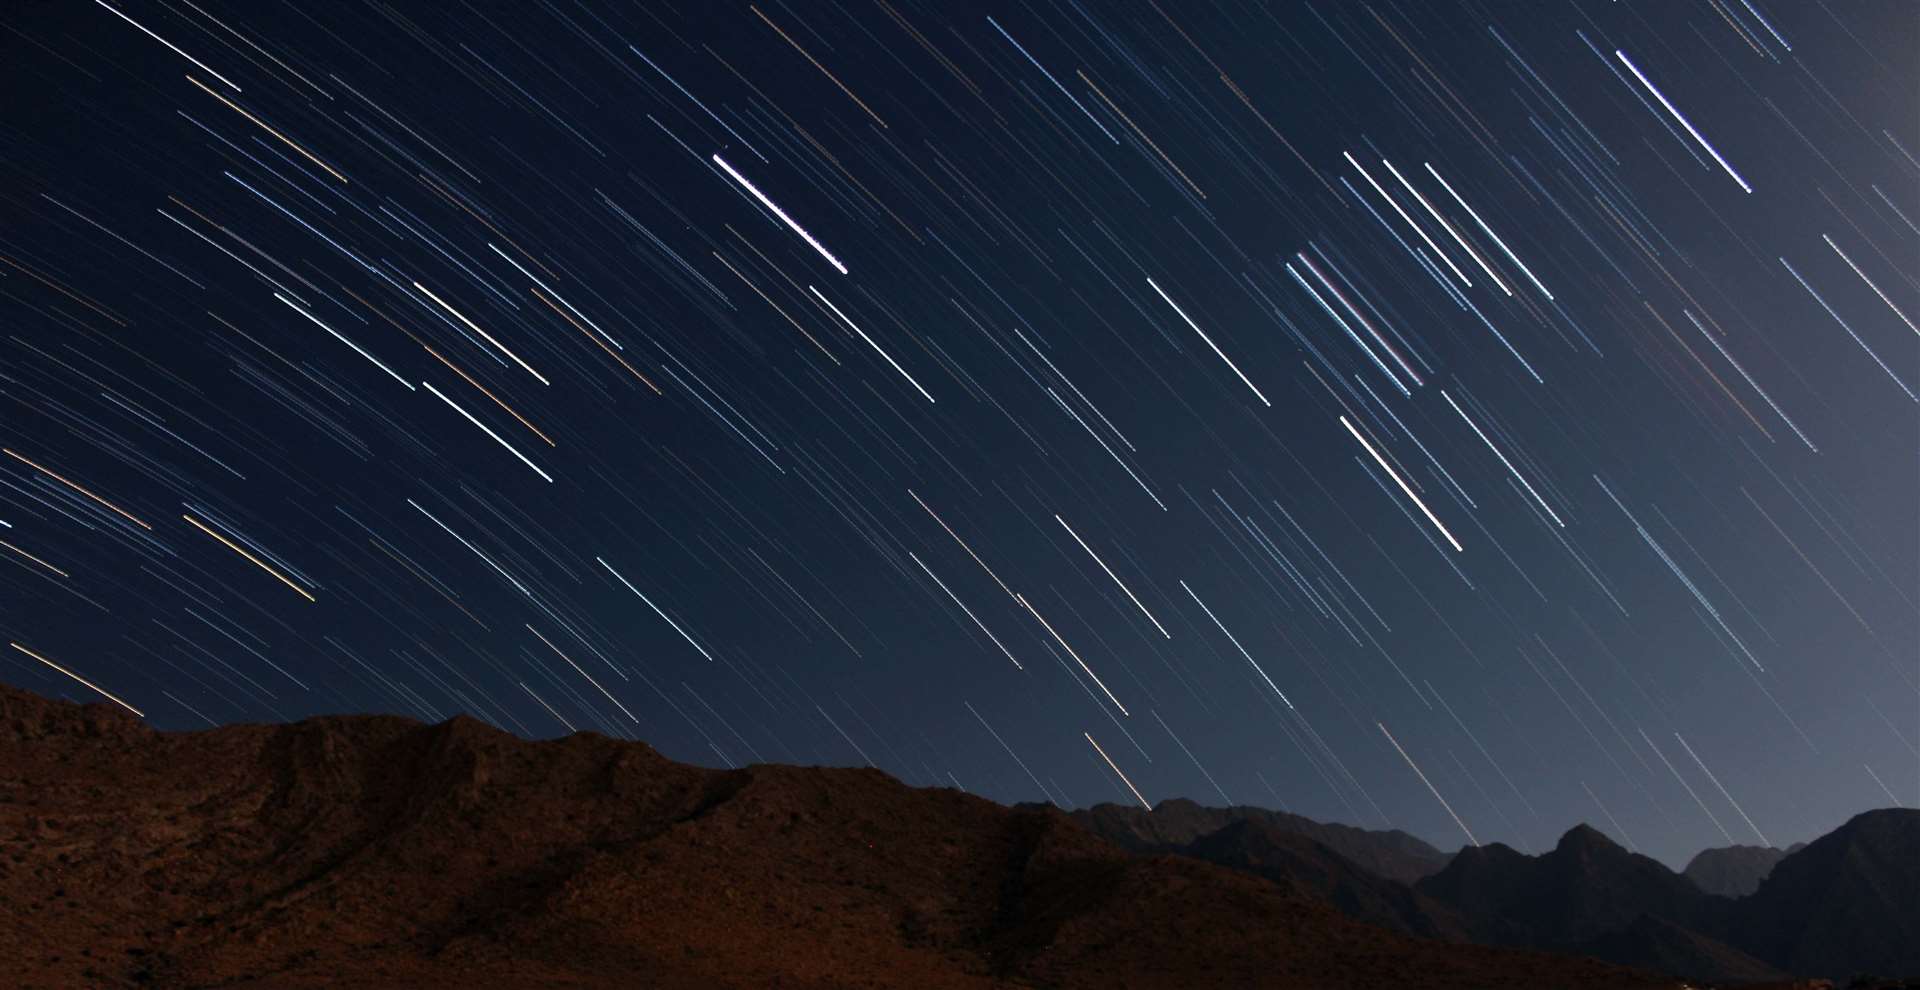 This meteor shower is often dubbed 'the best of the year' because it is so bright and active